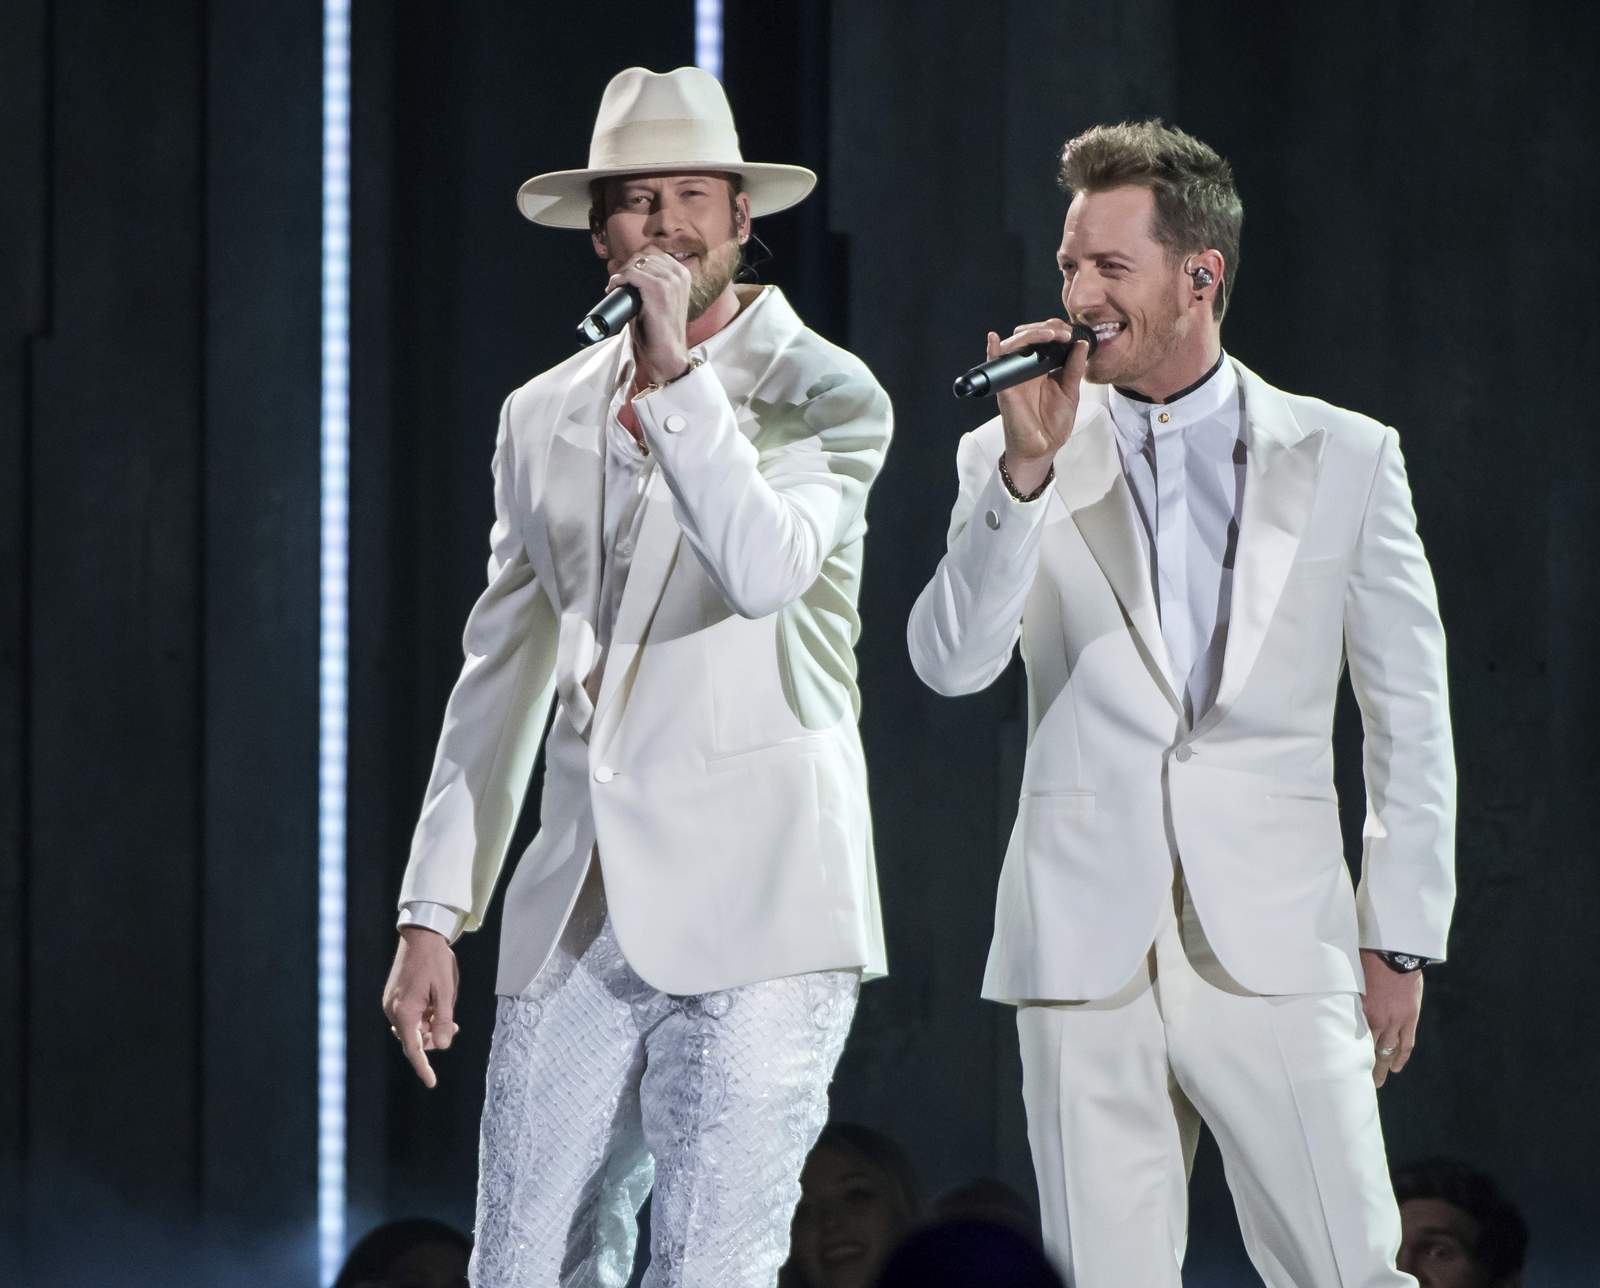 Positive COVID-19 test sidelines FGL’s Tyler Hubbard at CMAs